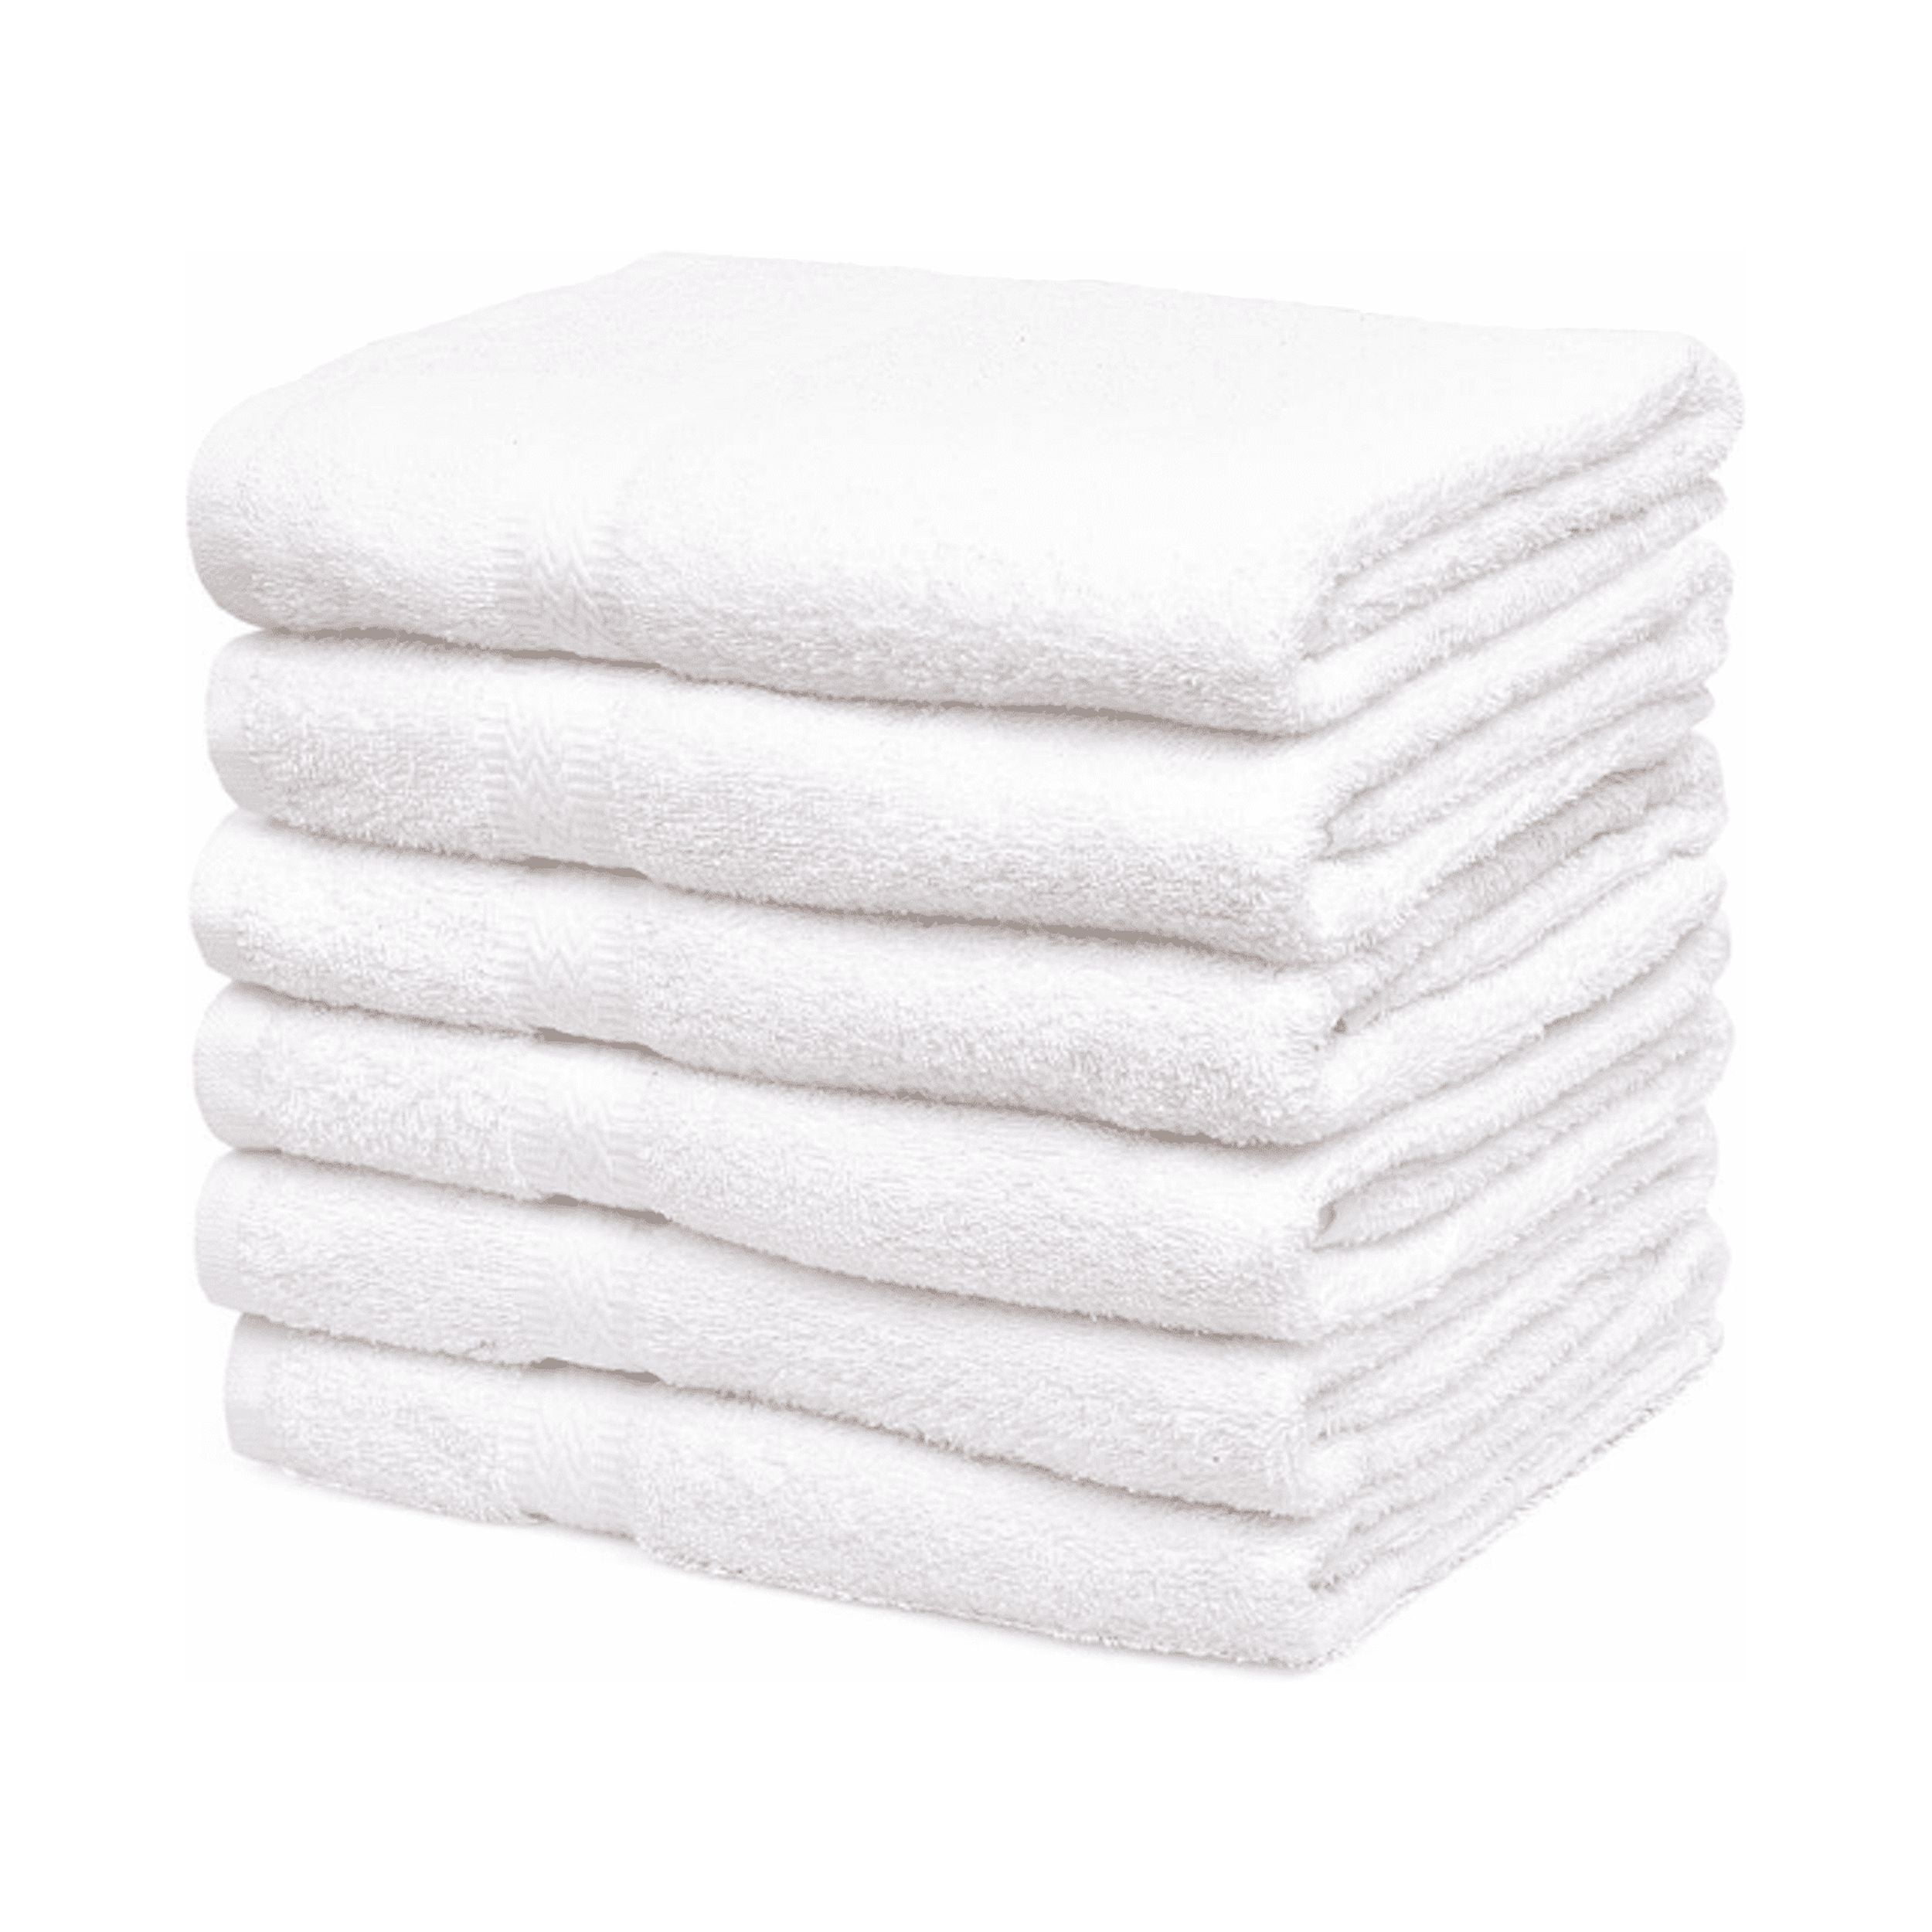 Tens Towels Luxe, 4 PC Mint XL 30x60 Inches Popcorn Textured Bath Towels  Extra Large, 100% Cotton, Absorbent and Quick Dry, Ultimate Luxury Towels  for